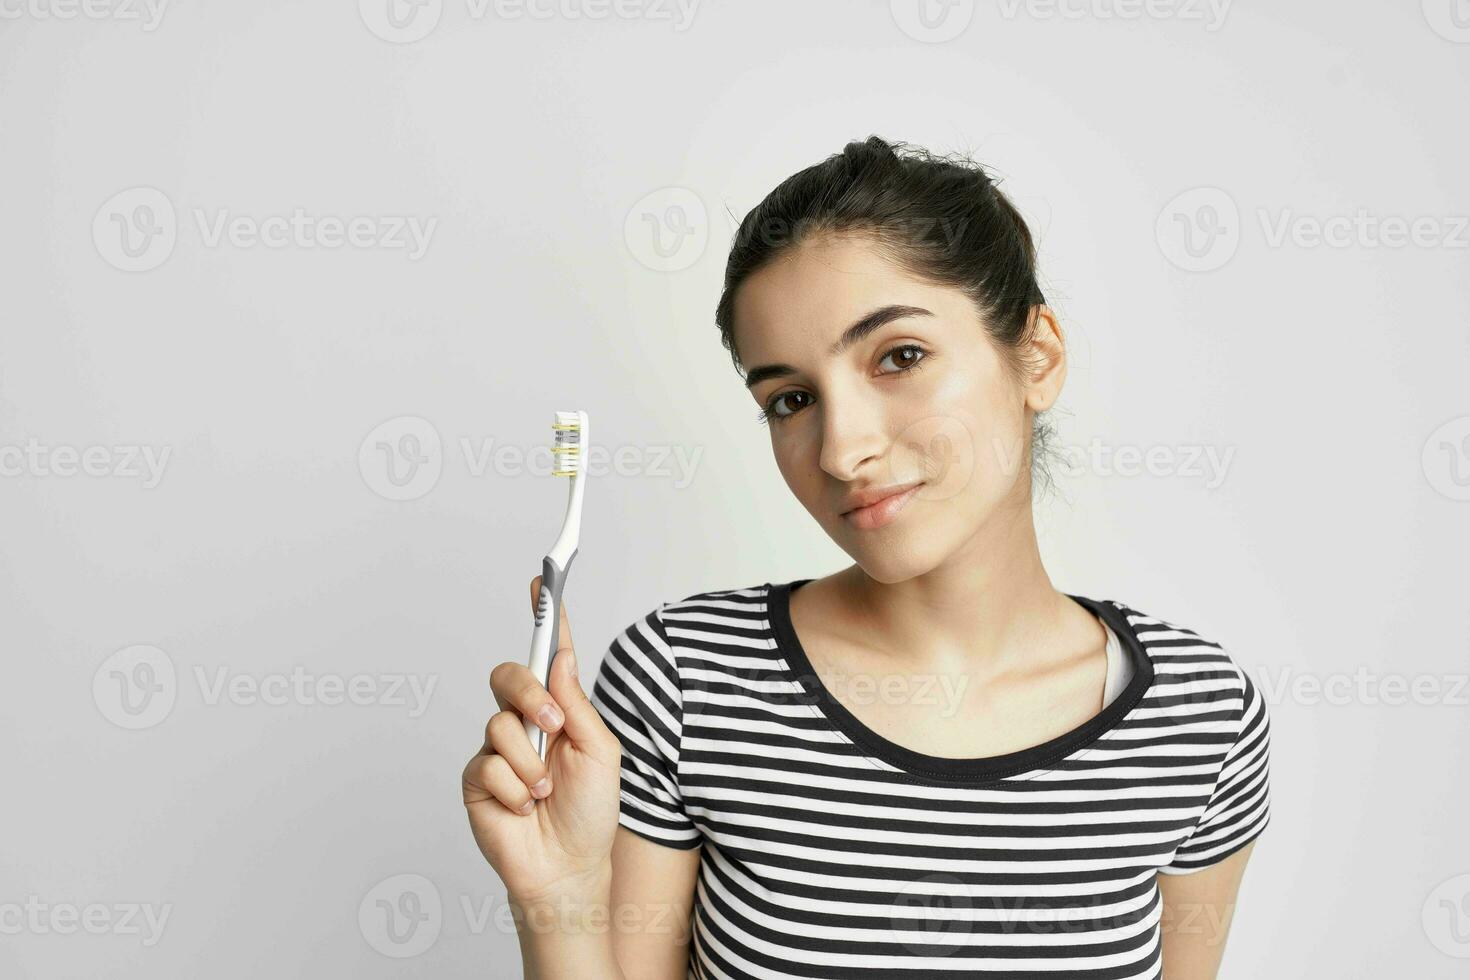 woman in a striped t-shirt toothbrush in hand light background photo